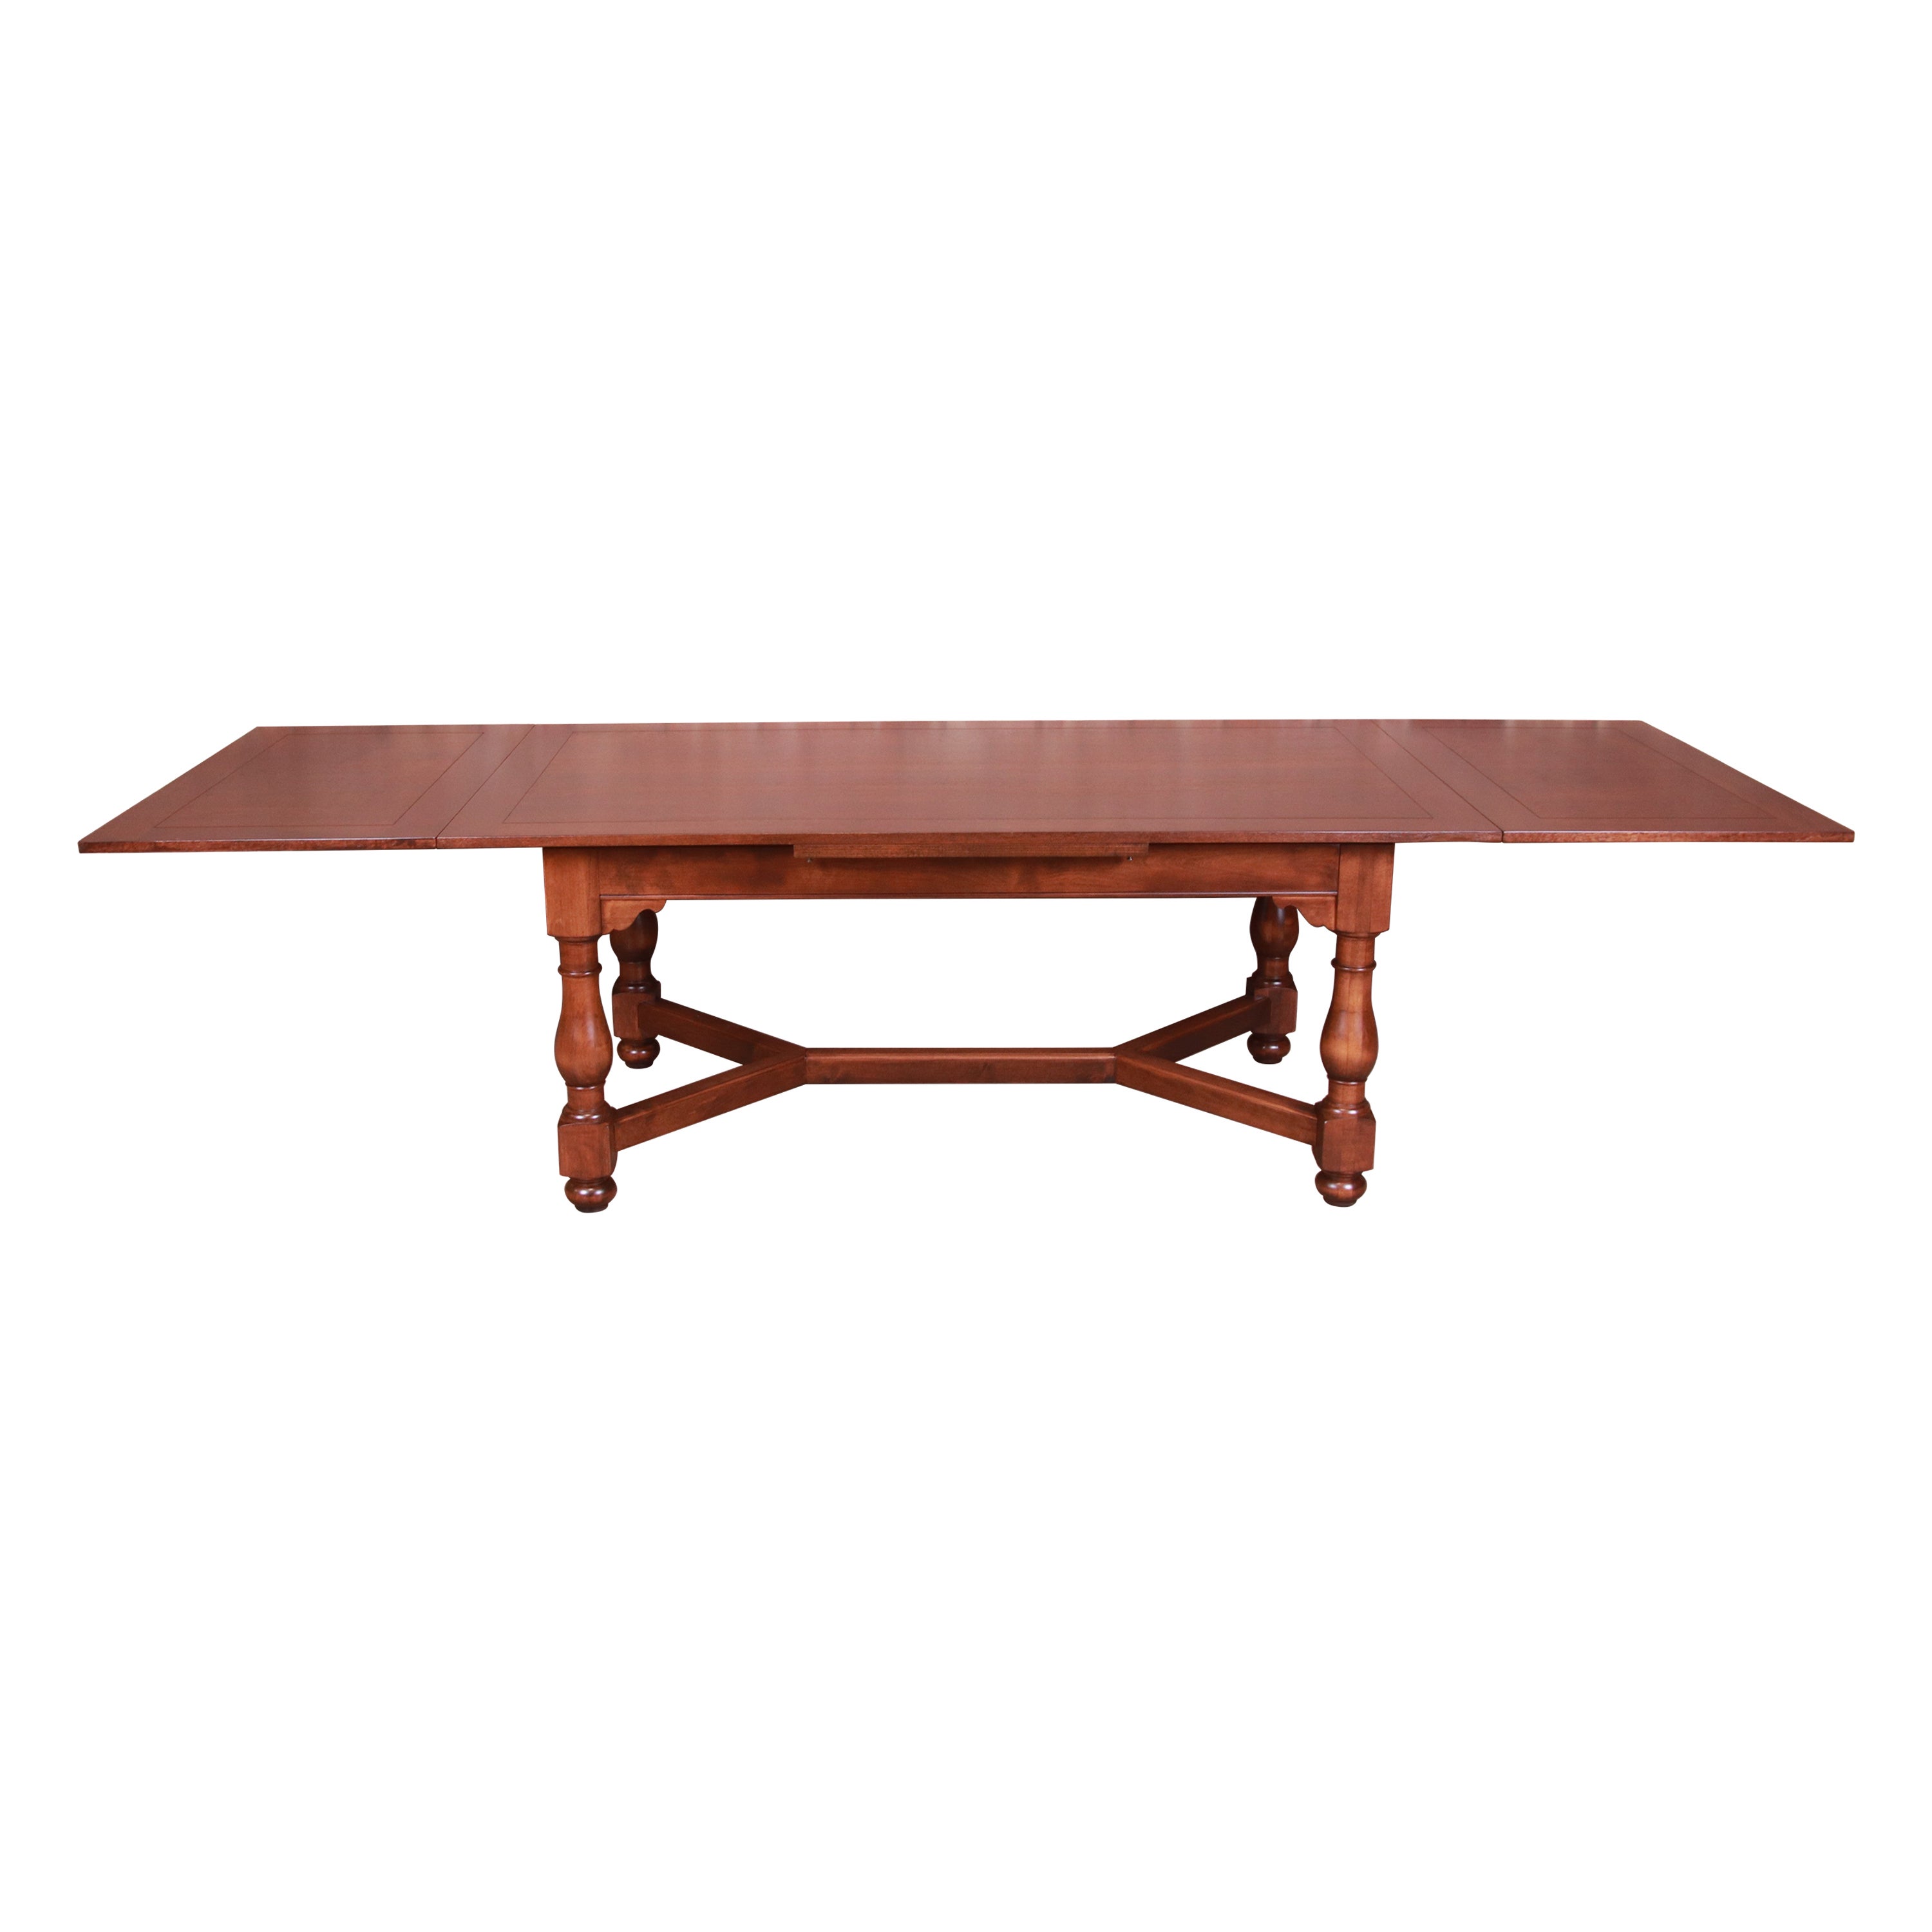 Baker Furniture Oak Harvest Farmhouse Extension Dining Table, Newly Refinished